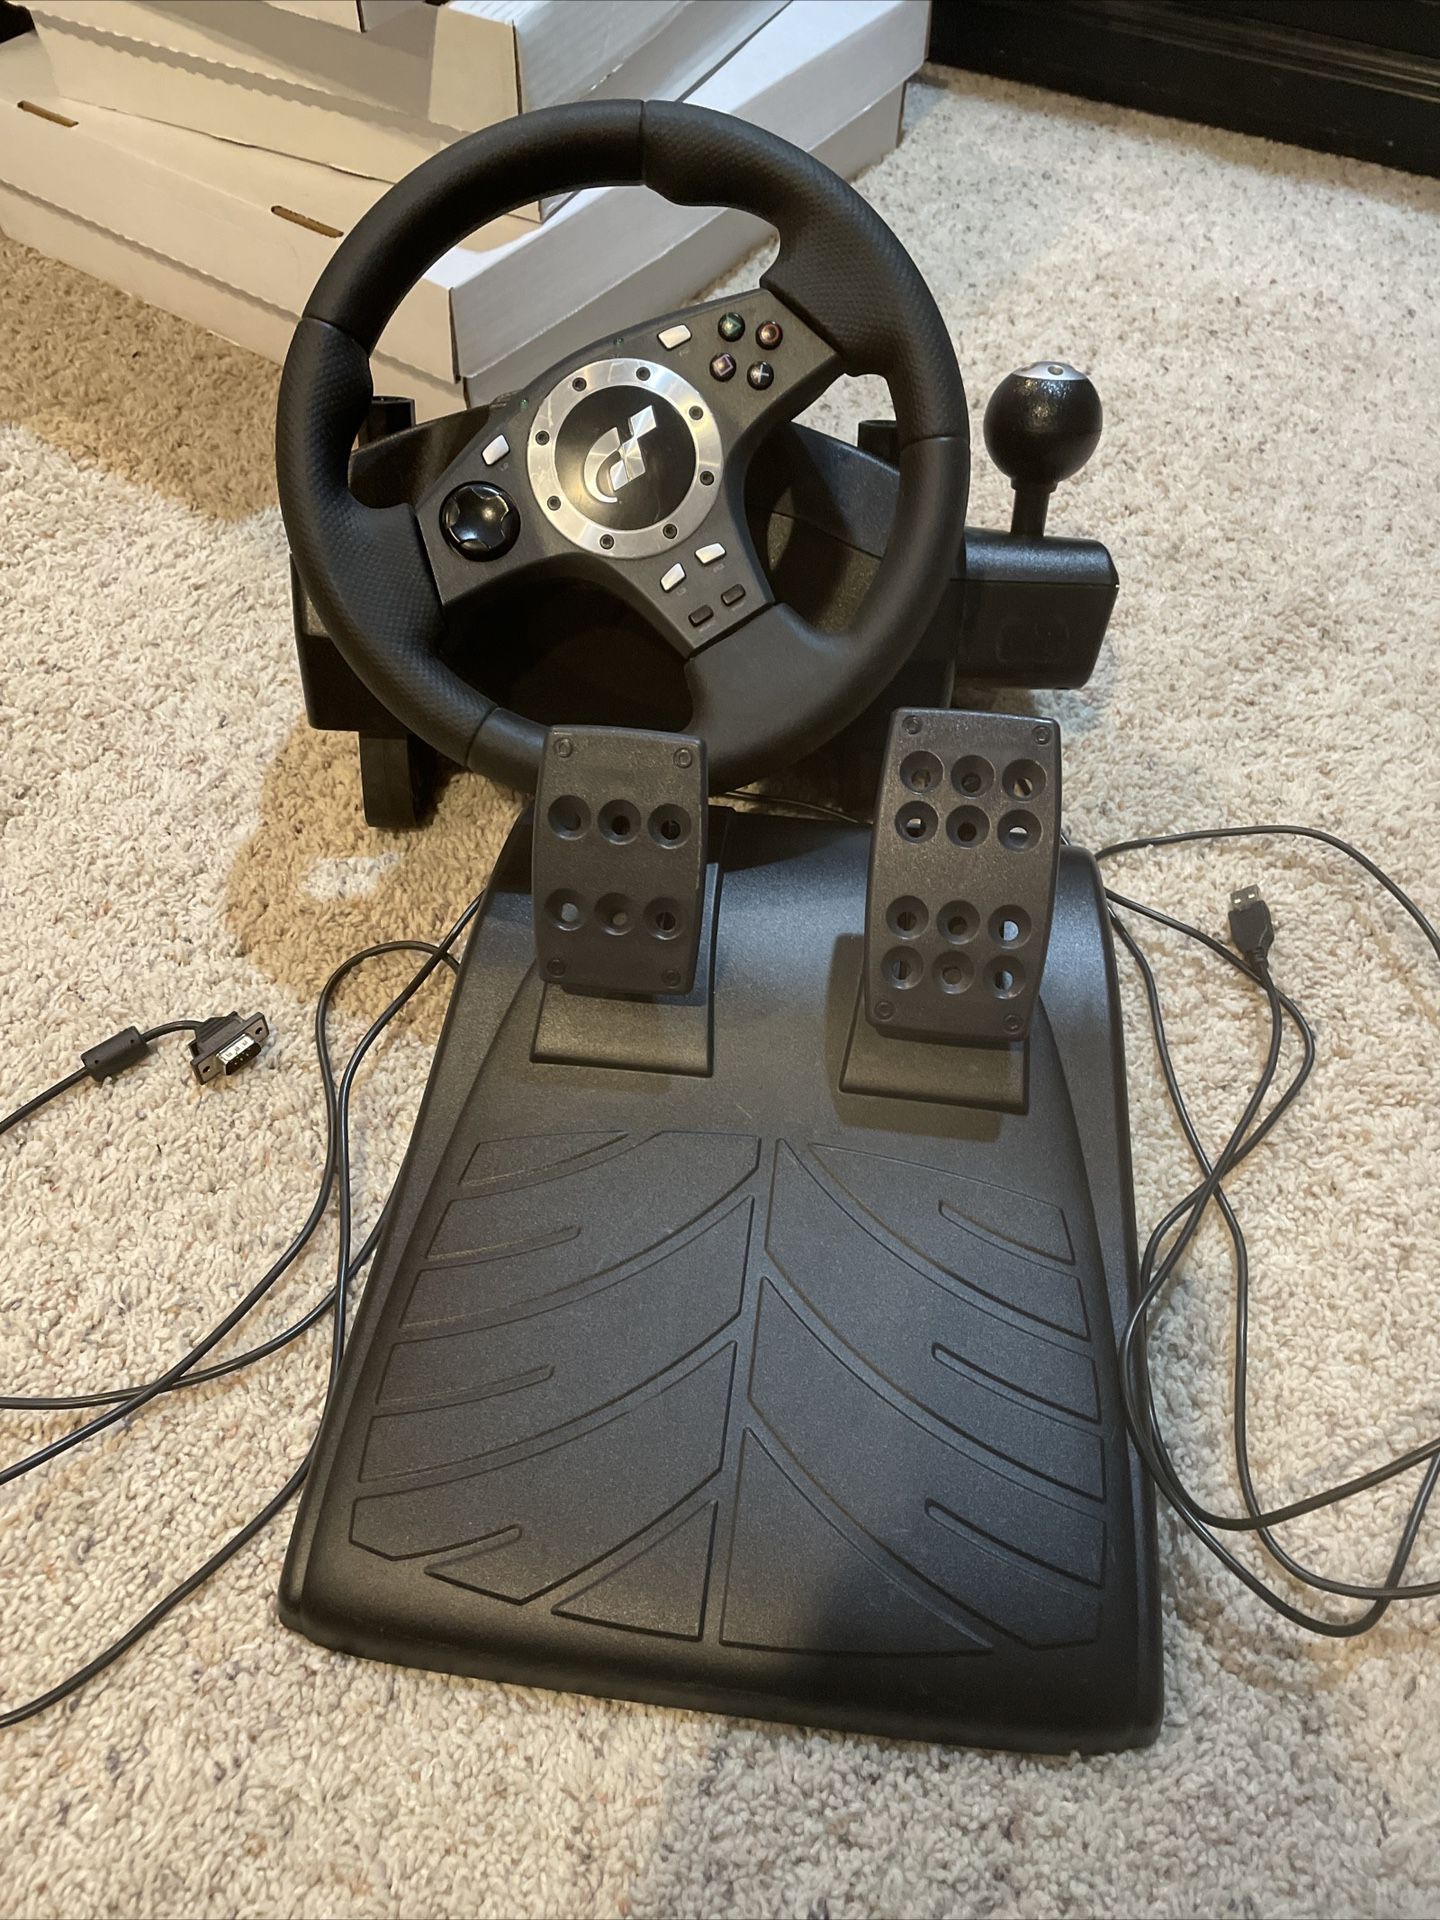 Sony PlayStation 2 Logitech Driving Pro Steering Wheel Gran Ps2 for Sale in Hanover Township, PA -